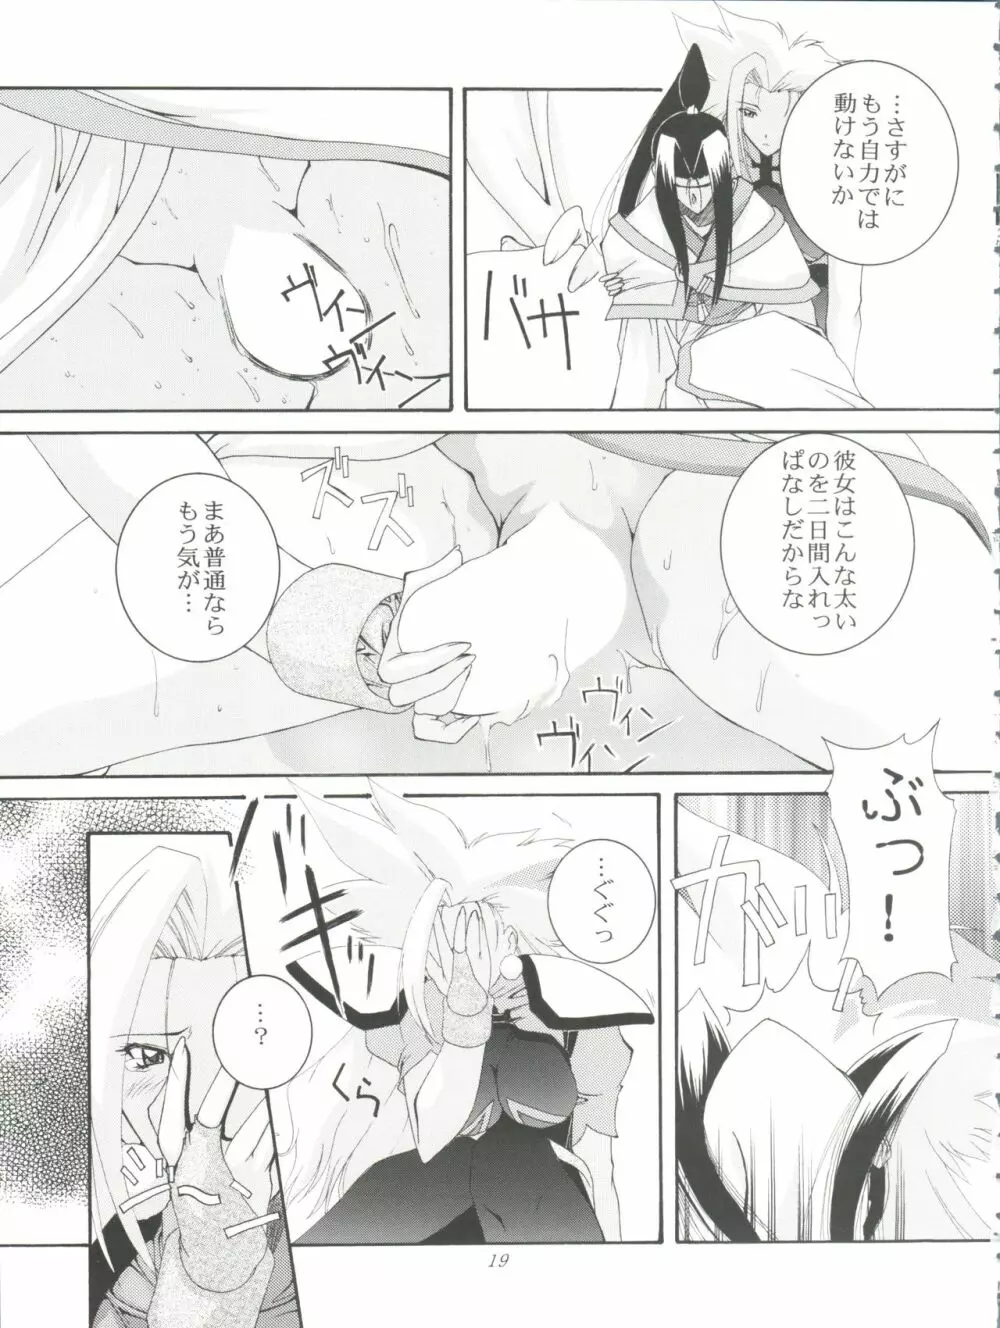 HAБAT coy 22 - ANGEL STAR Page.19